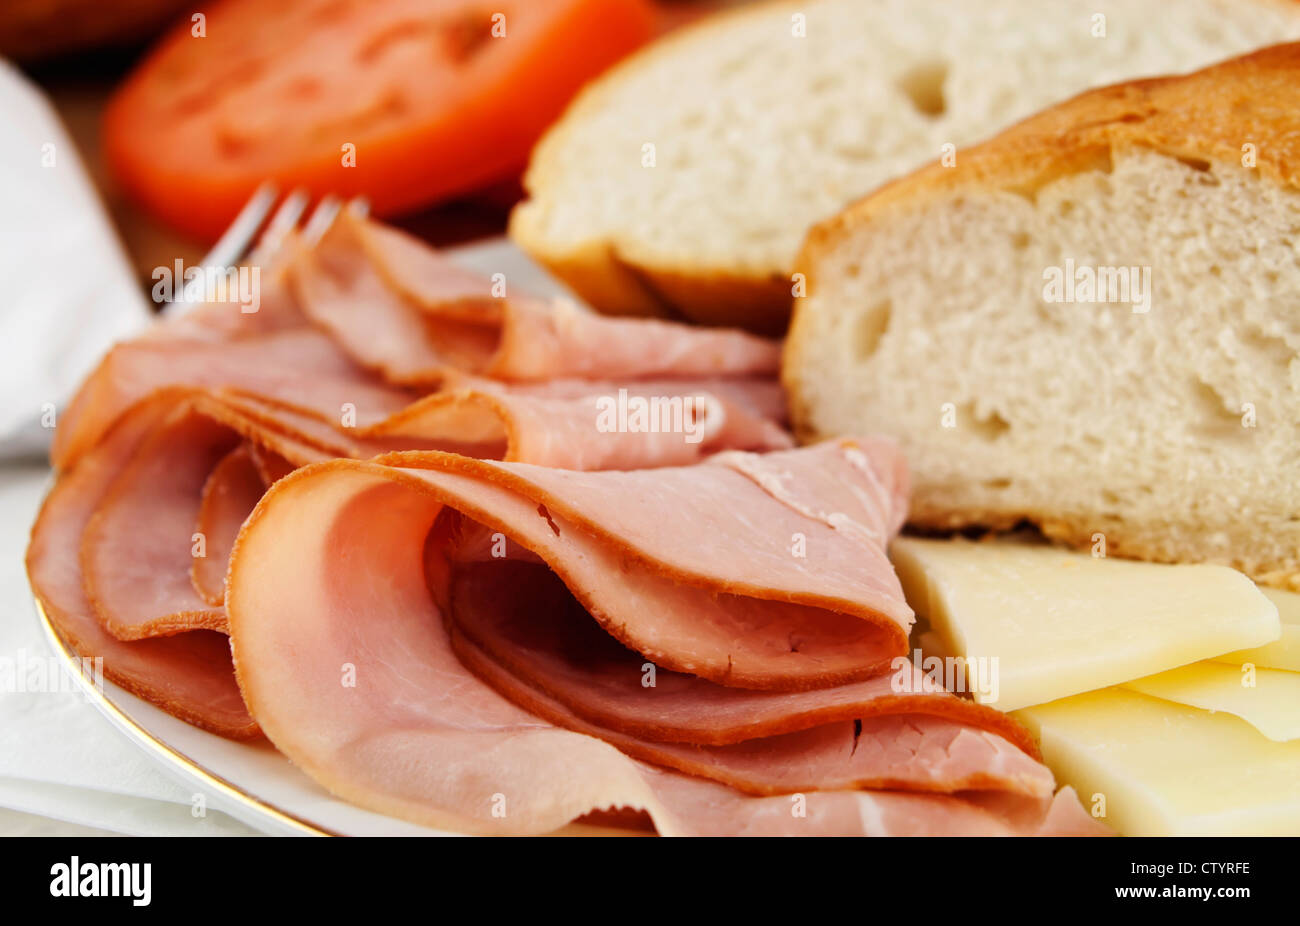 Delicious lunch time spread with ham, bread, cheese and tomatoes with silver fork. Stock Photo